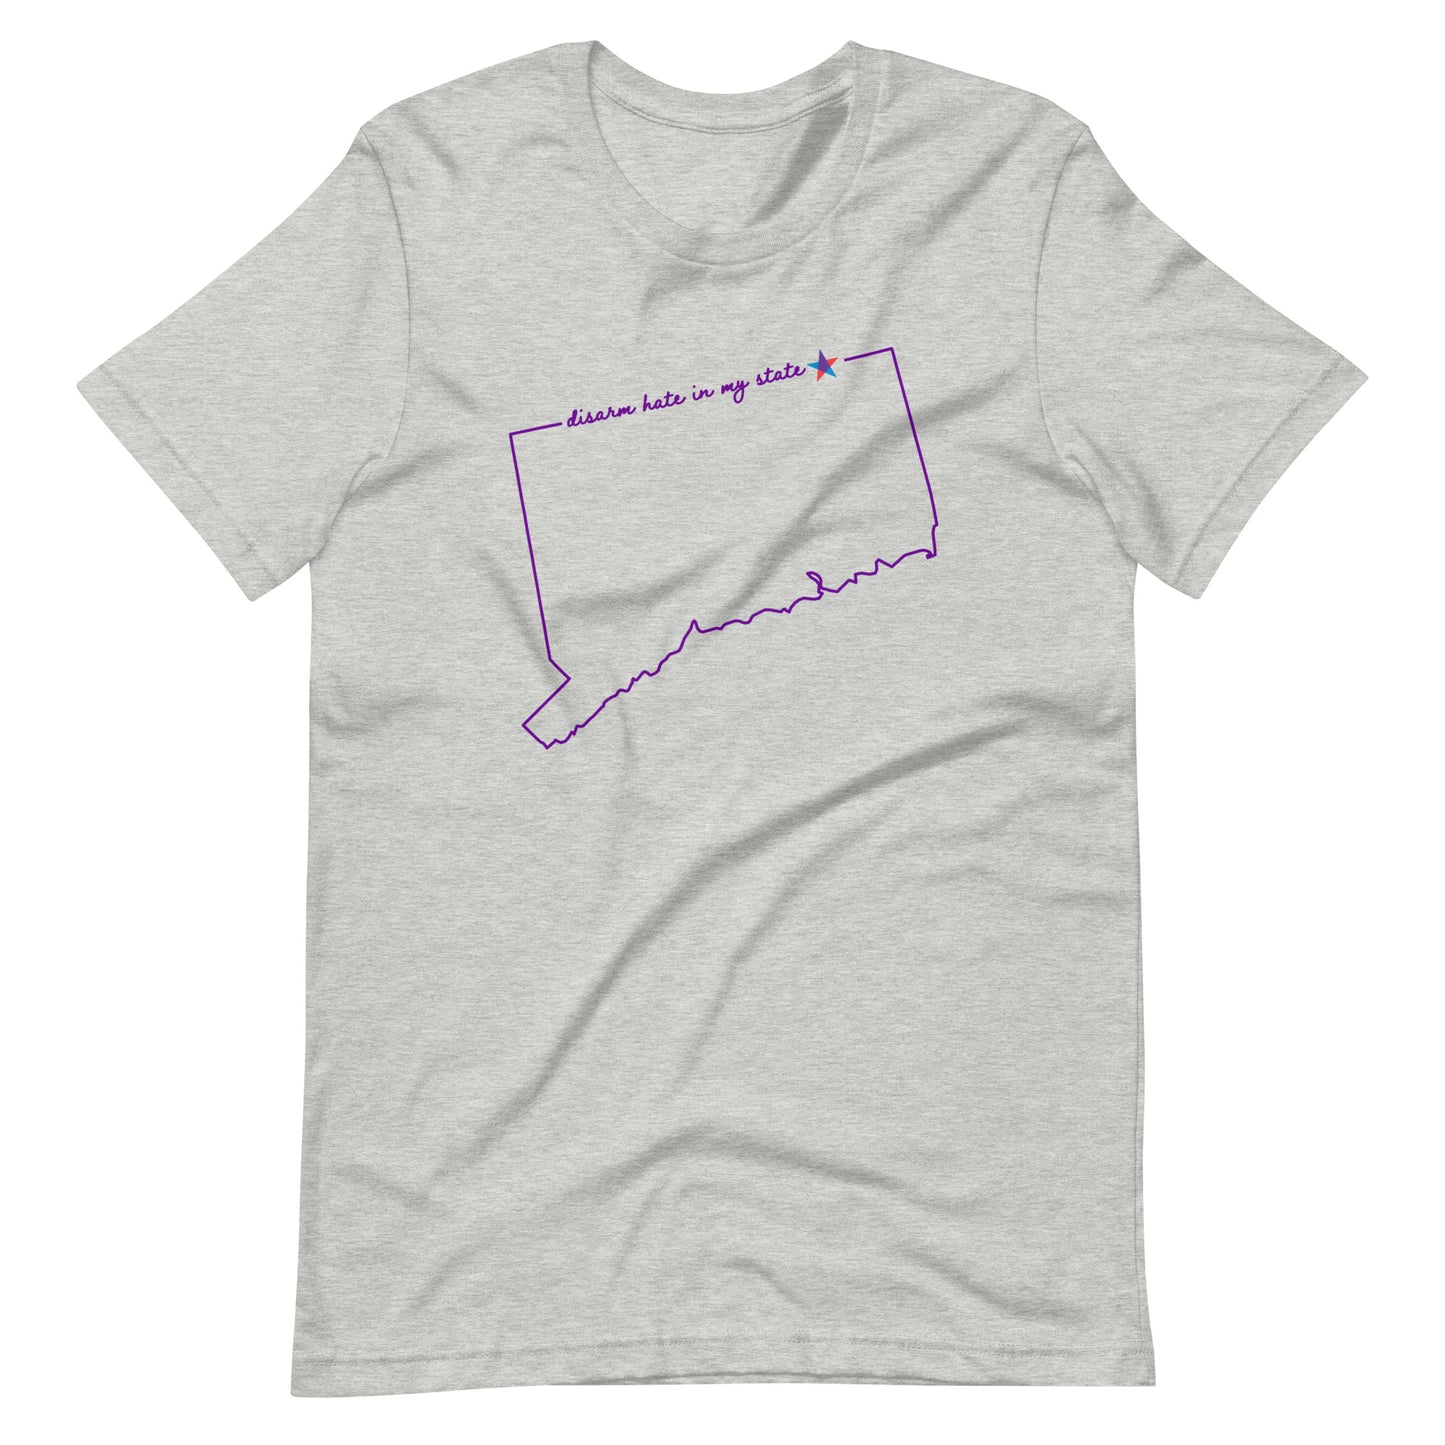 Disarm Hate in My State: Connecticut Unisex Tee